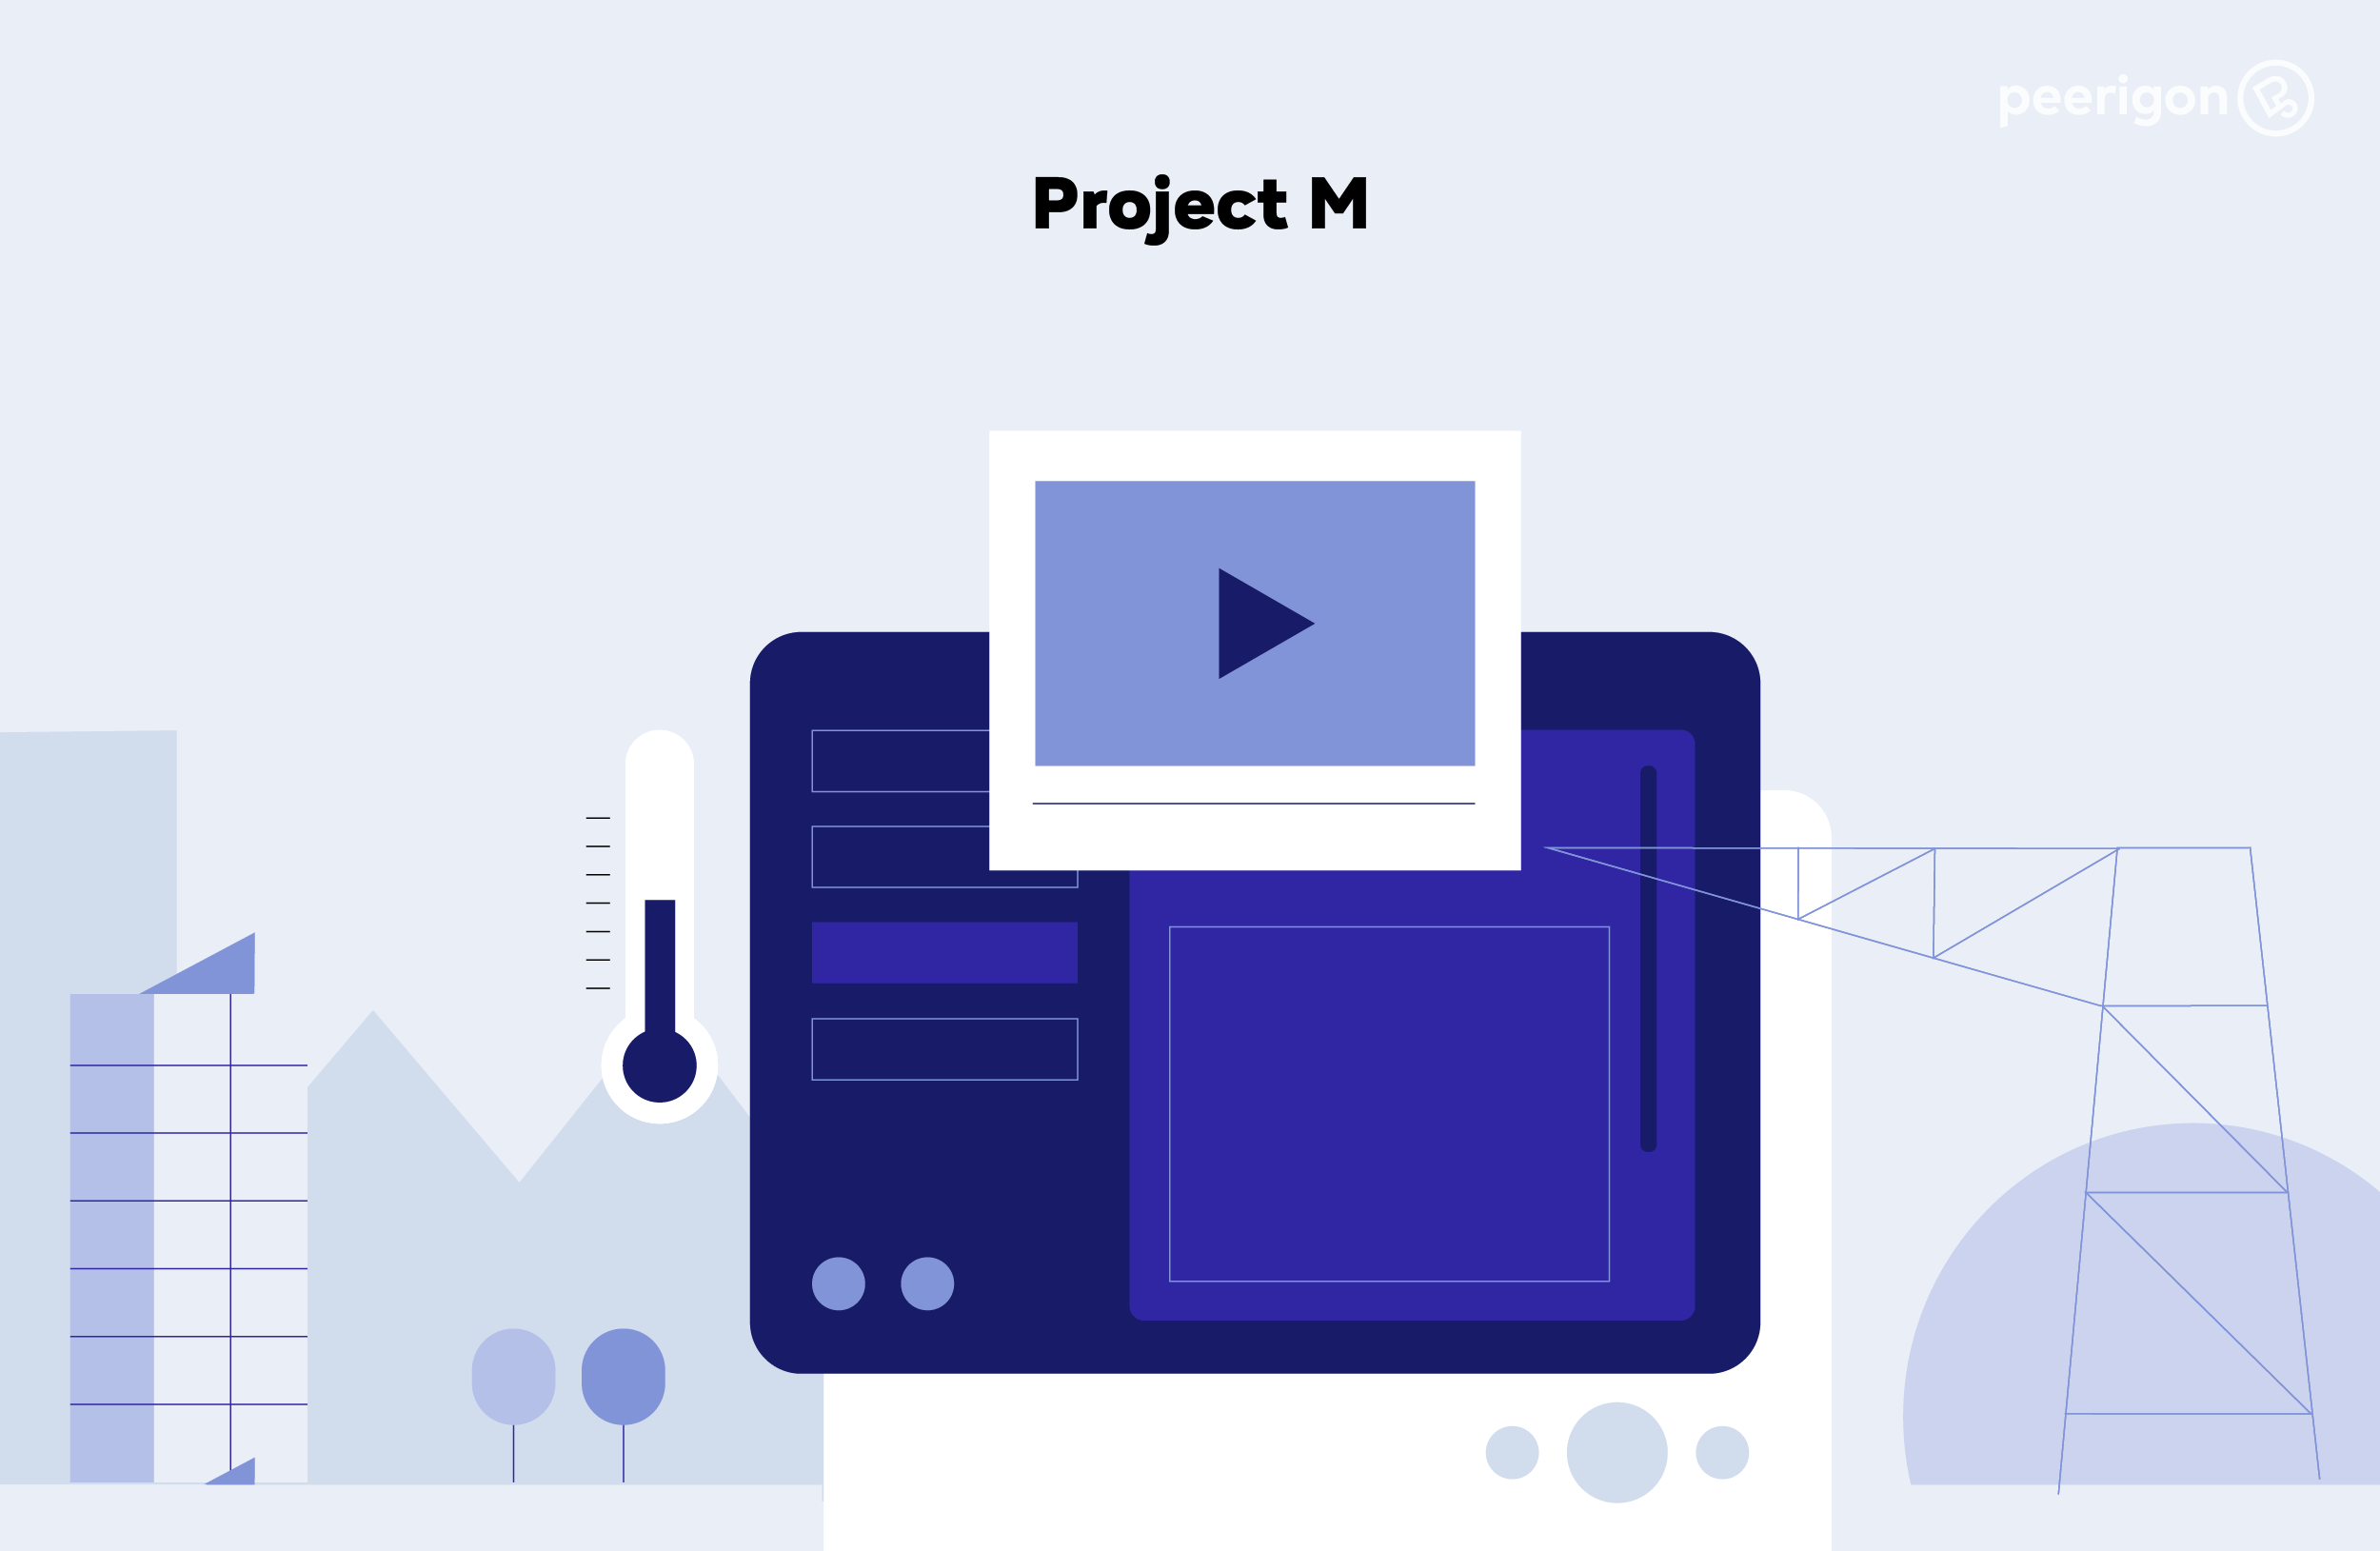 Project "M": example for an app with a medium feature scope